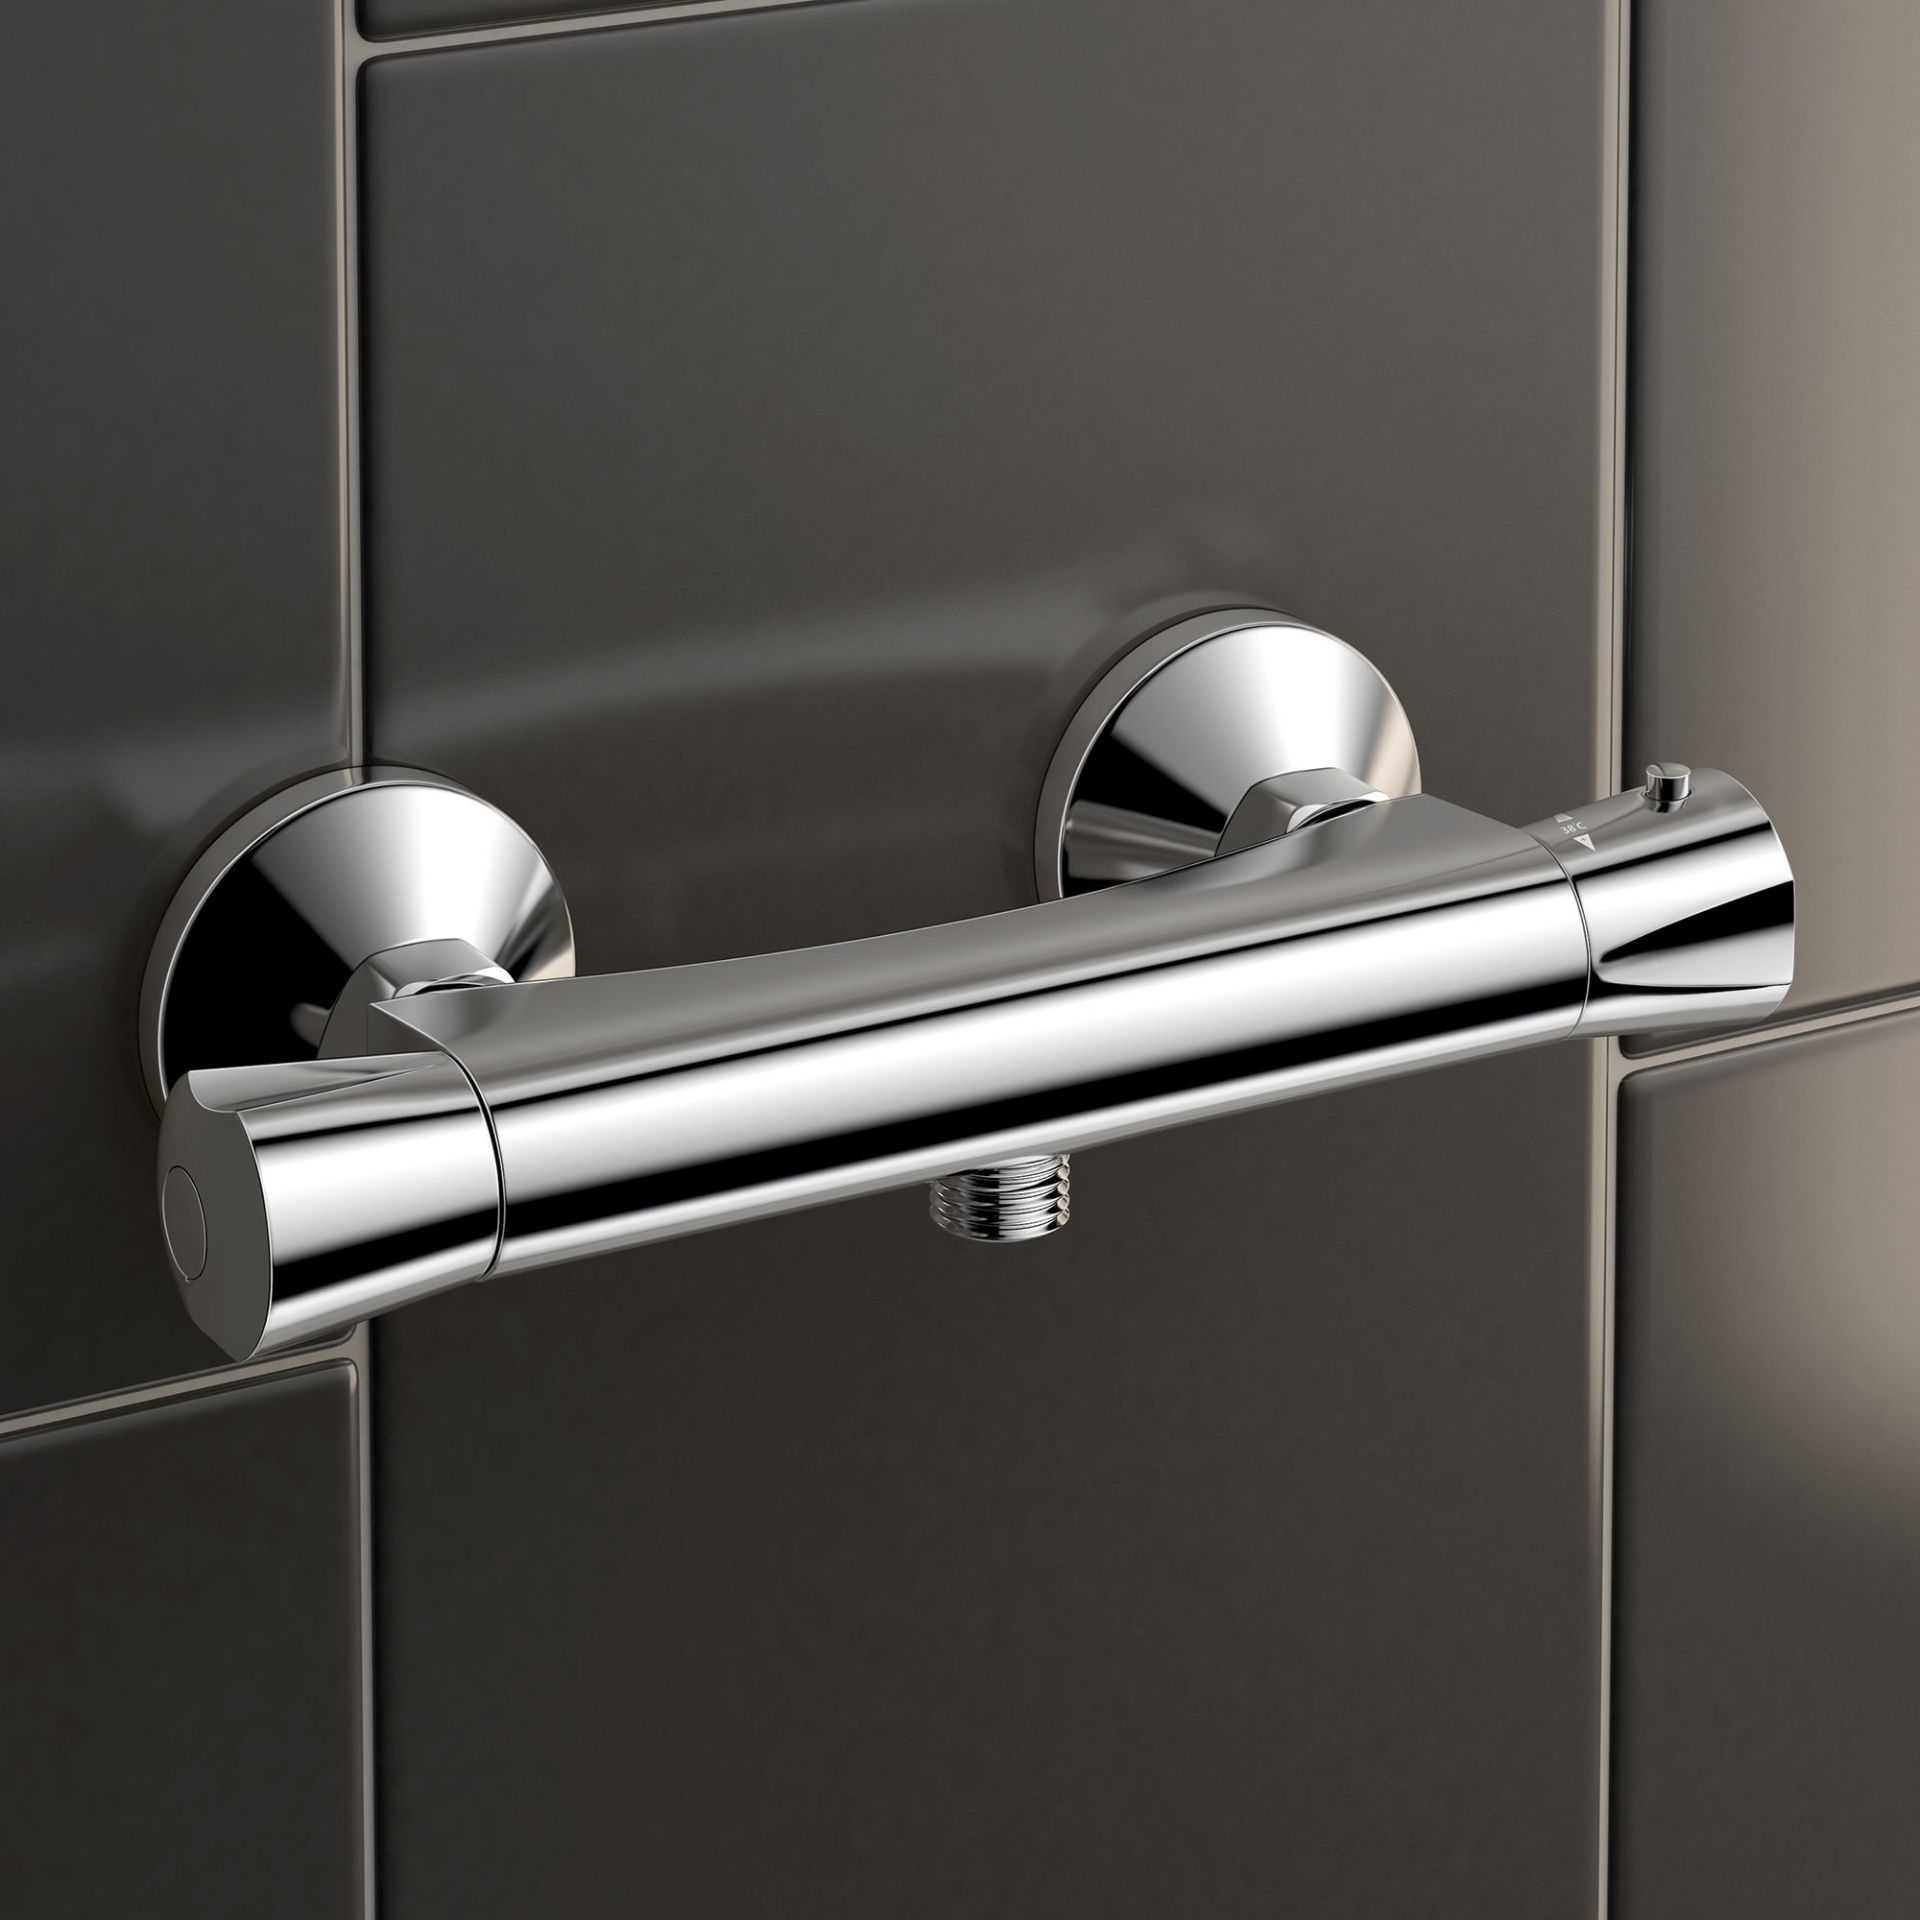 (G7) Thermostatic Shower Valve - Round Bar Mixer Chrome plated solid brass mixer Cool to Touch